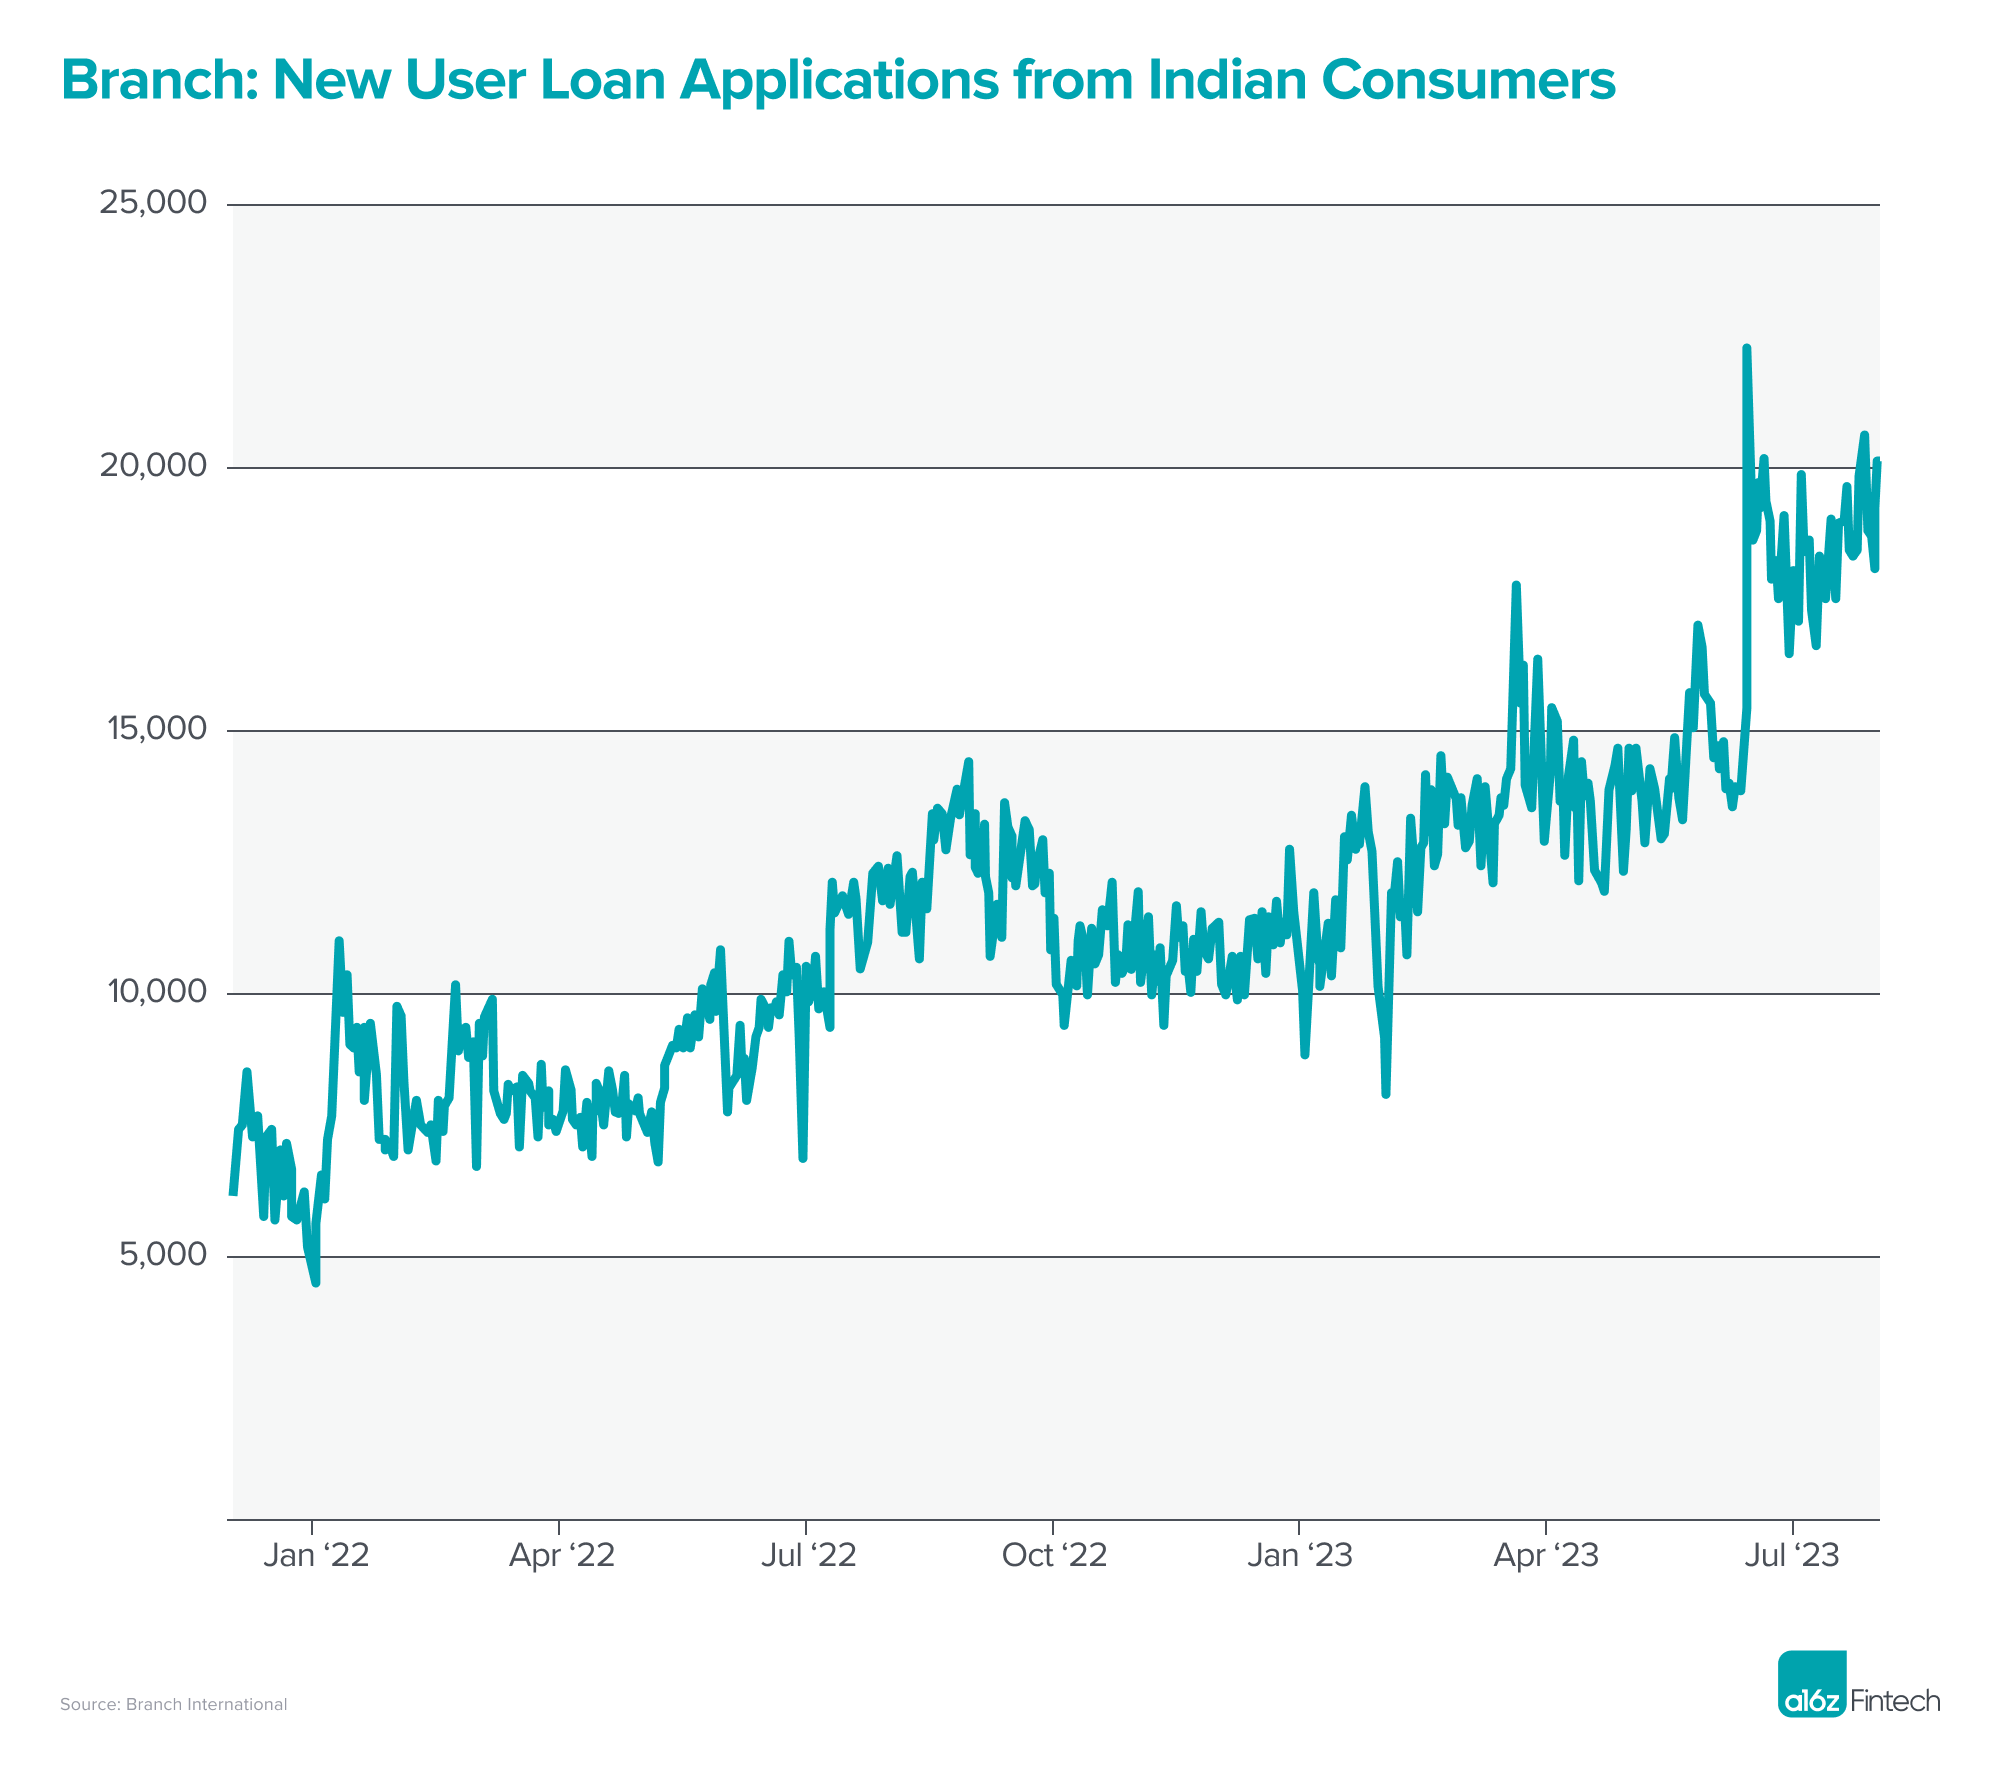 Graph showing new user loan applications from Indian consumers for Branch International